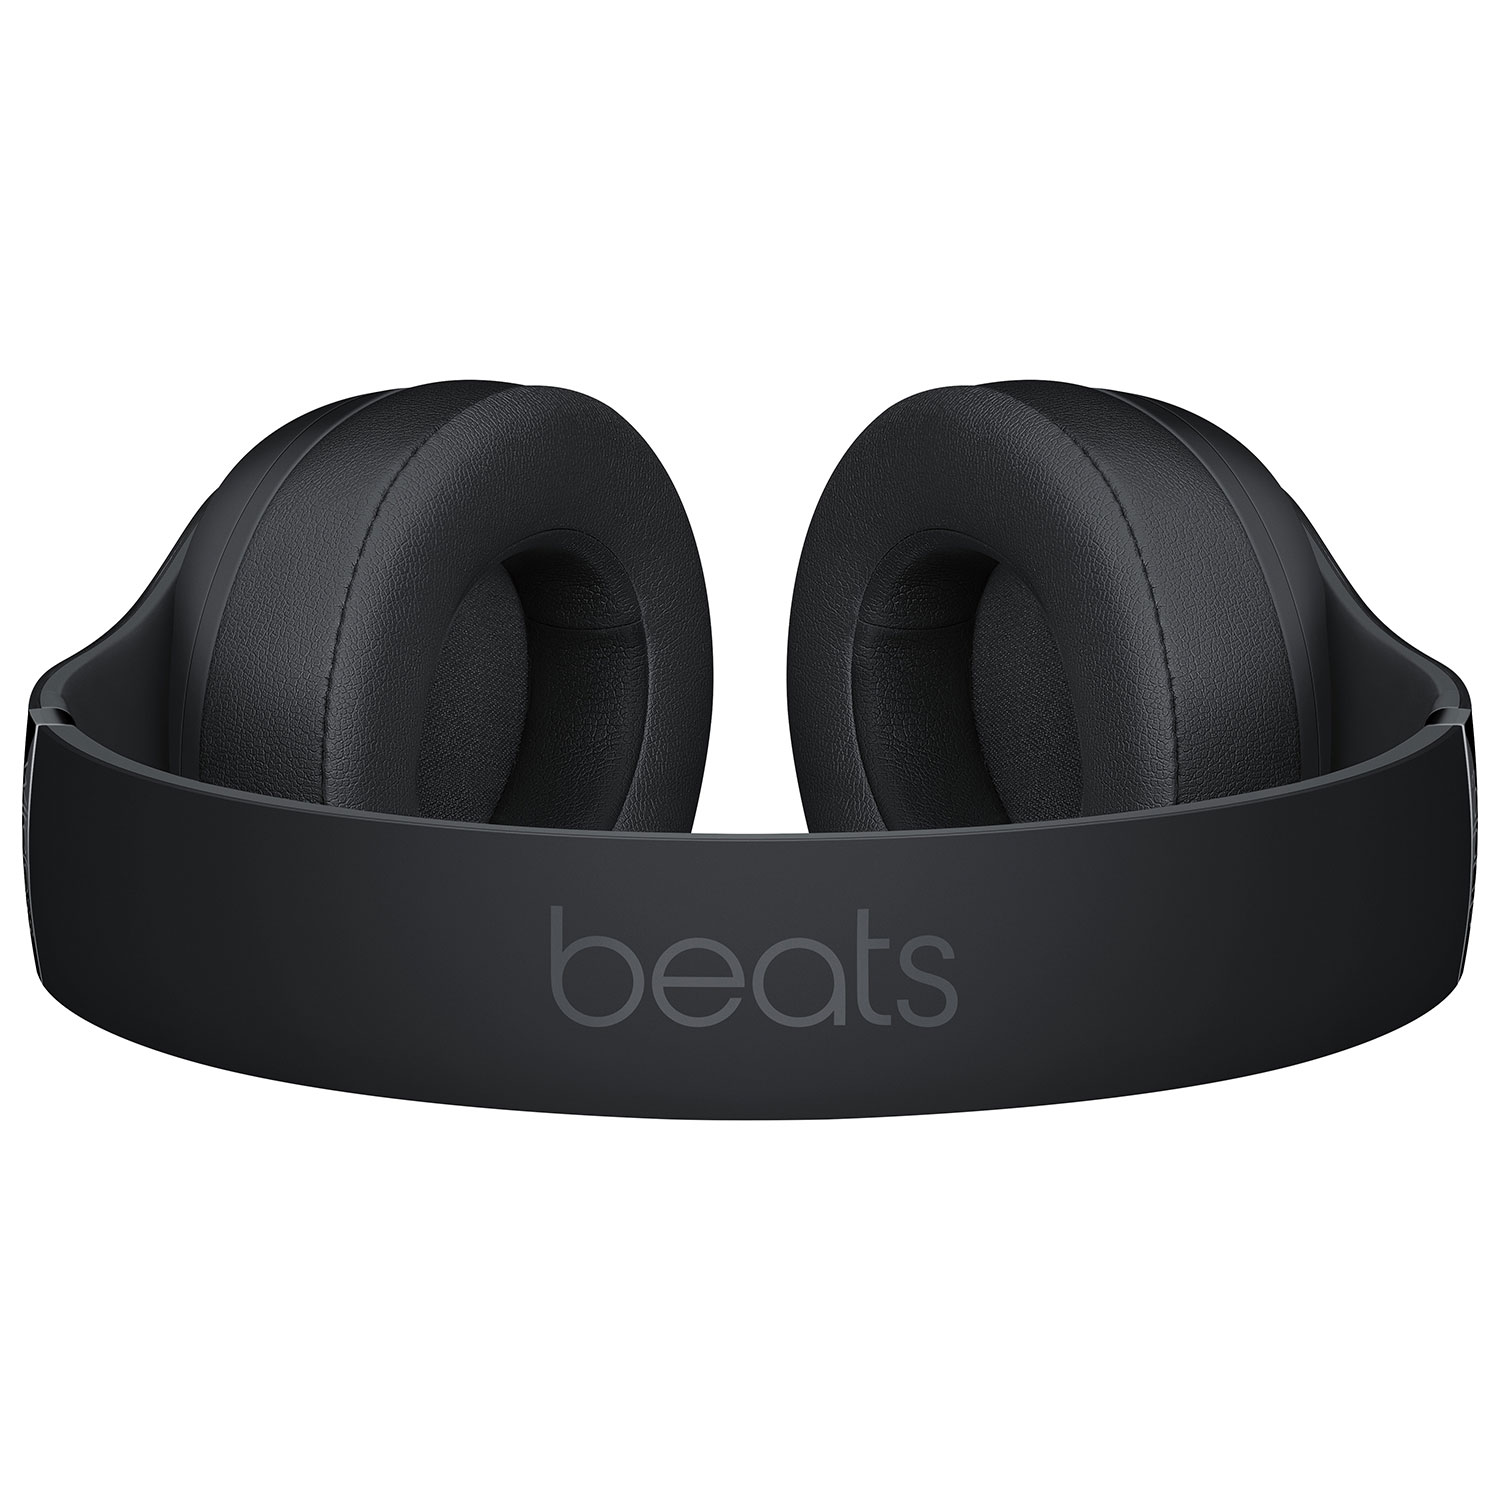 Beats by Dr. Dre Studio3 Over-Ear Noise Cancelling Bluetooth